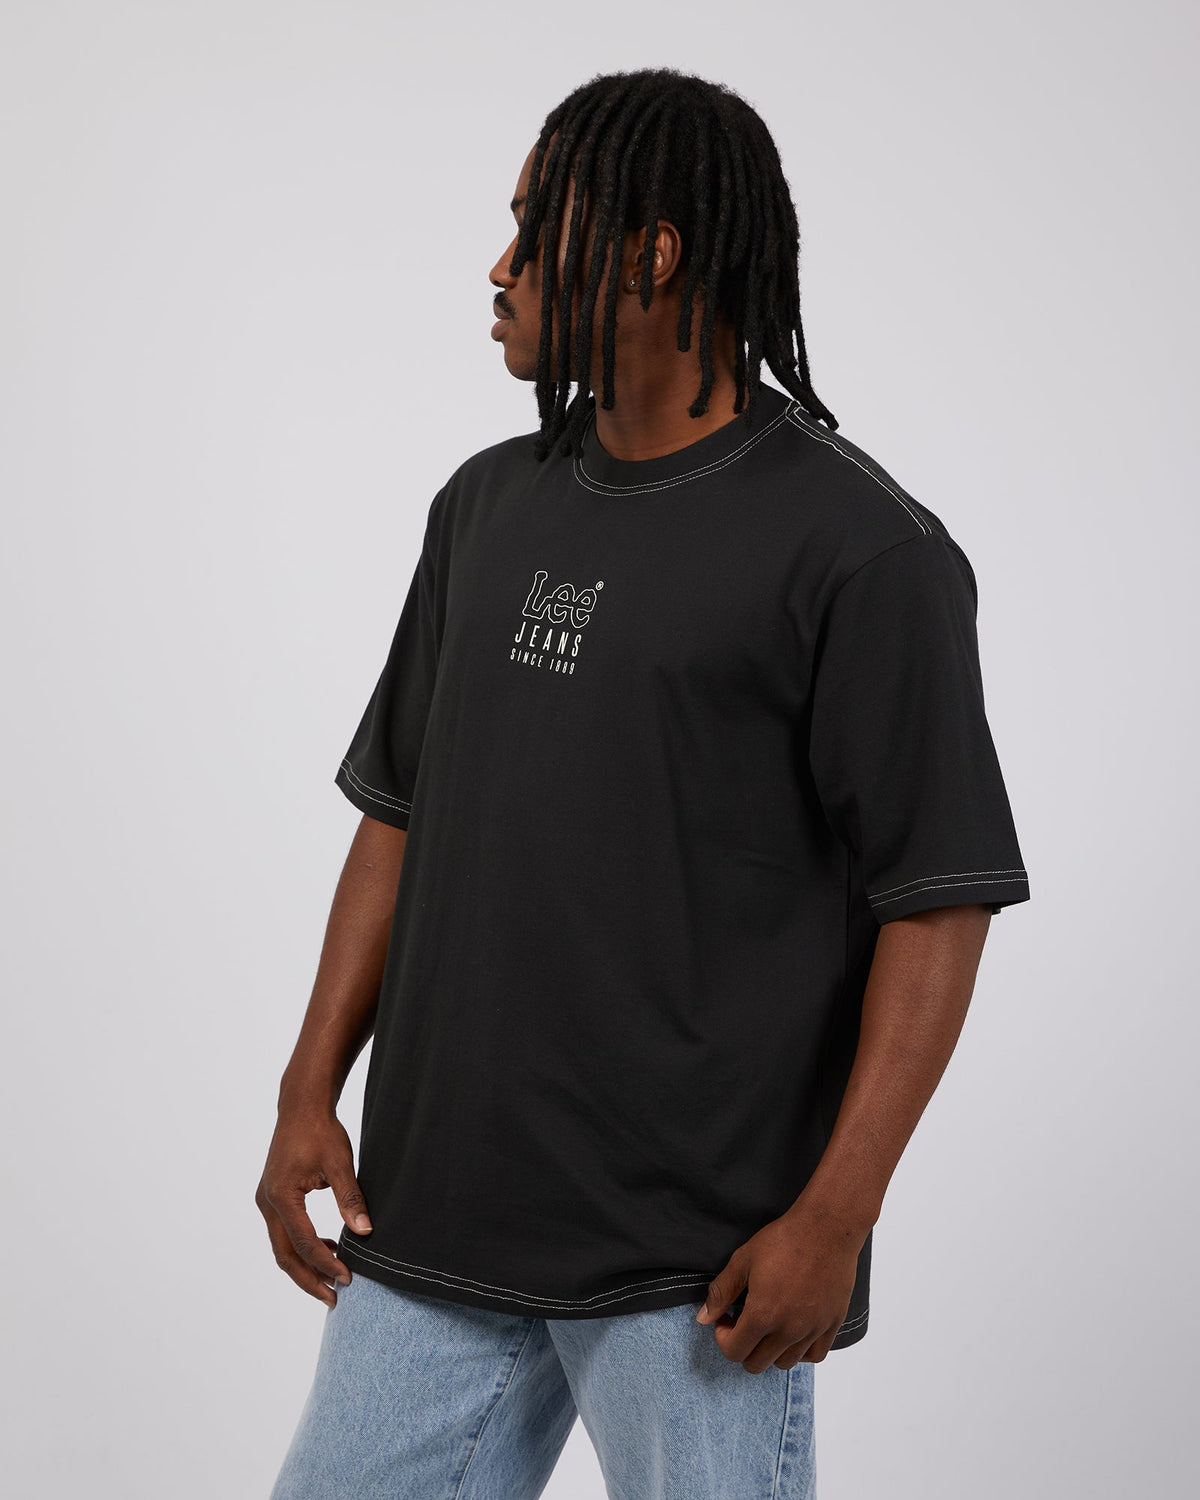 Lee-Twitch Baggy Tee Black Contrast-Edge Clothing